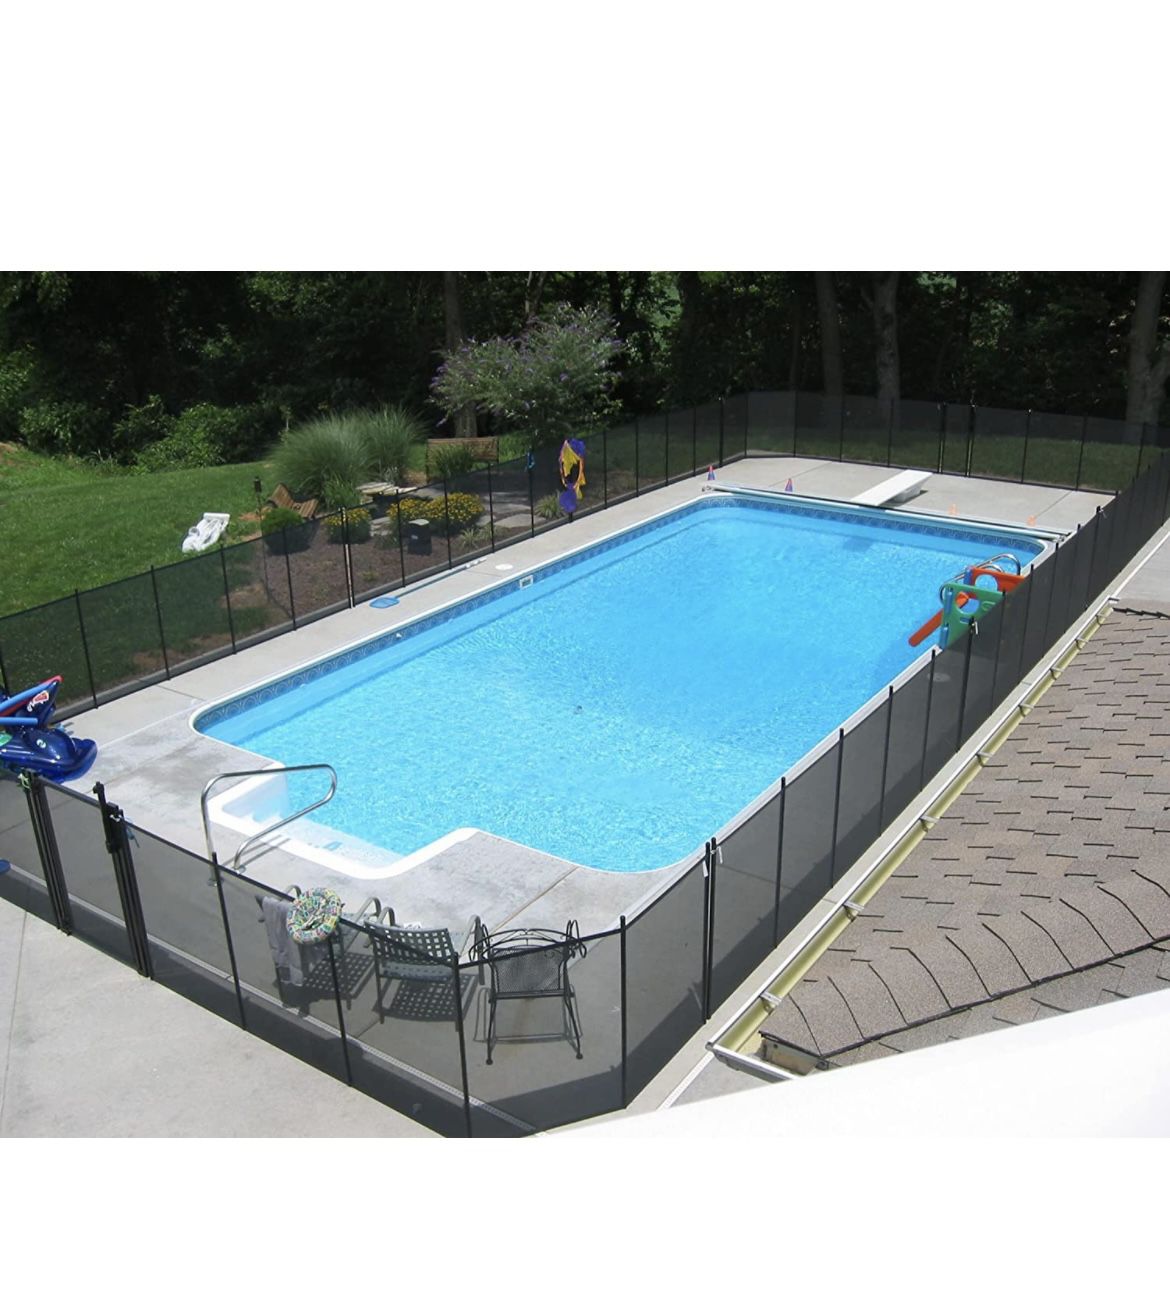 12-Foot Section of pool Fencing 